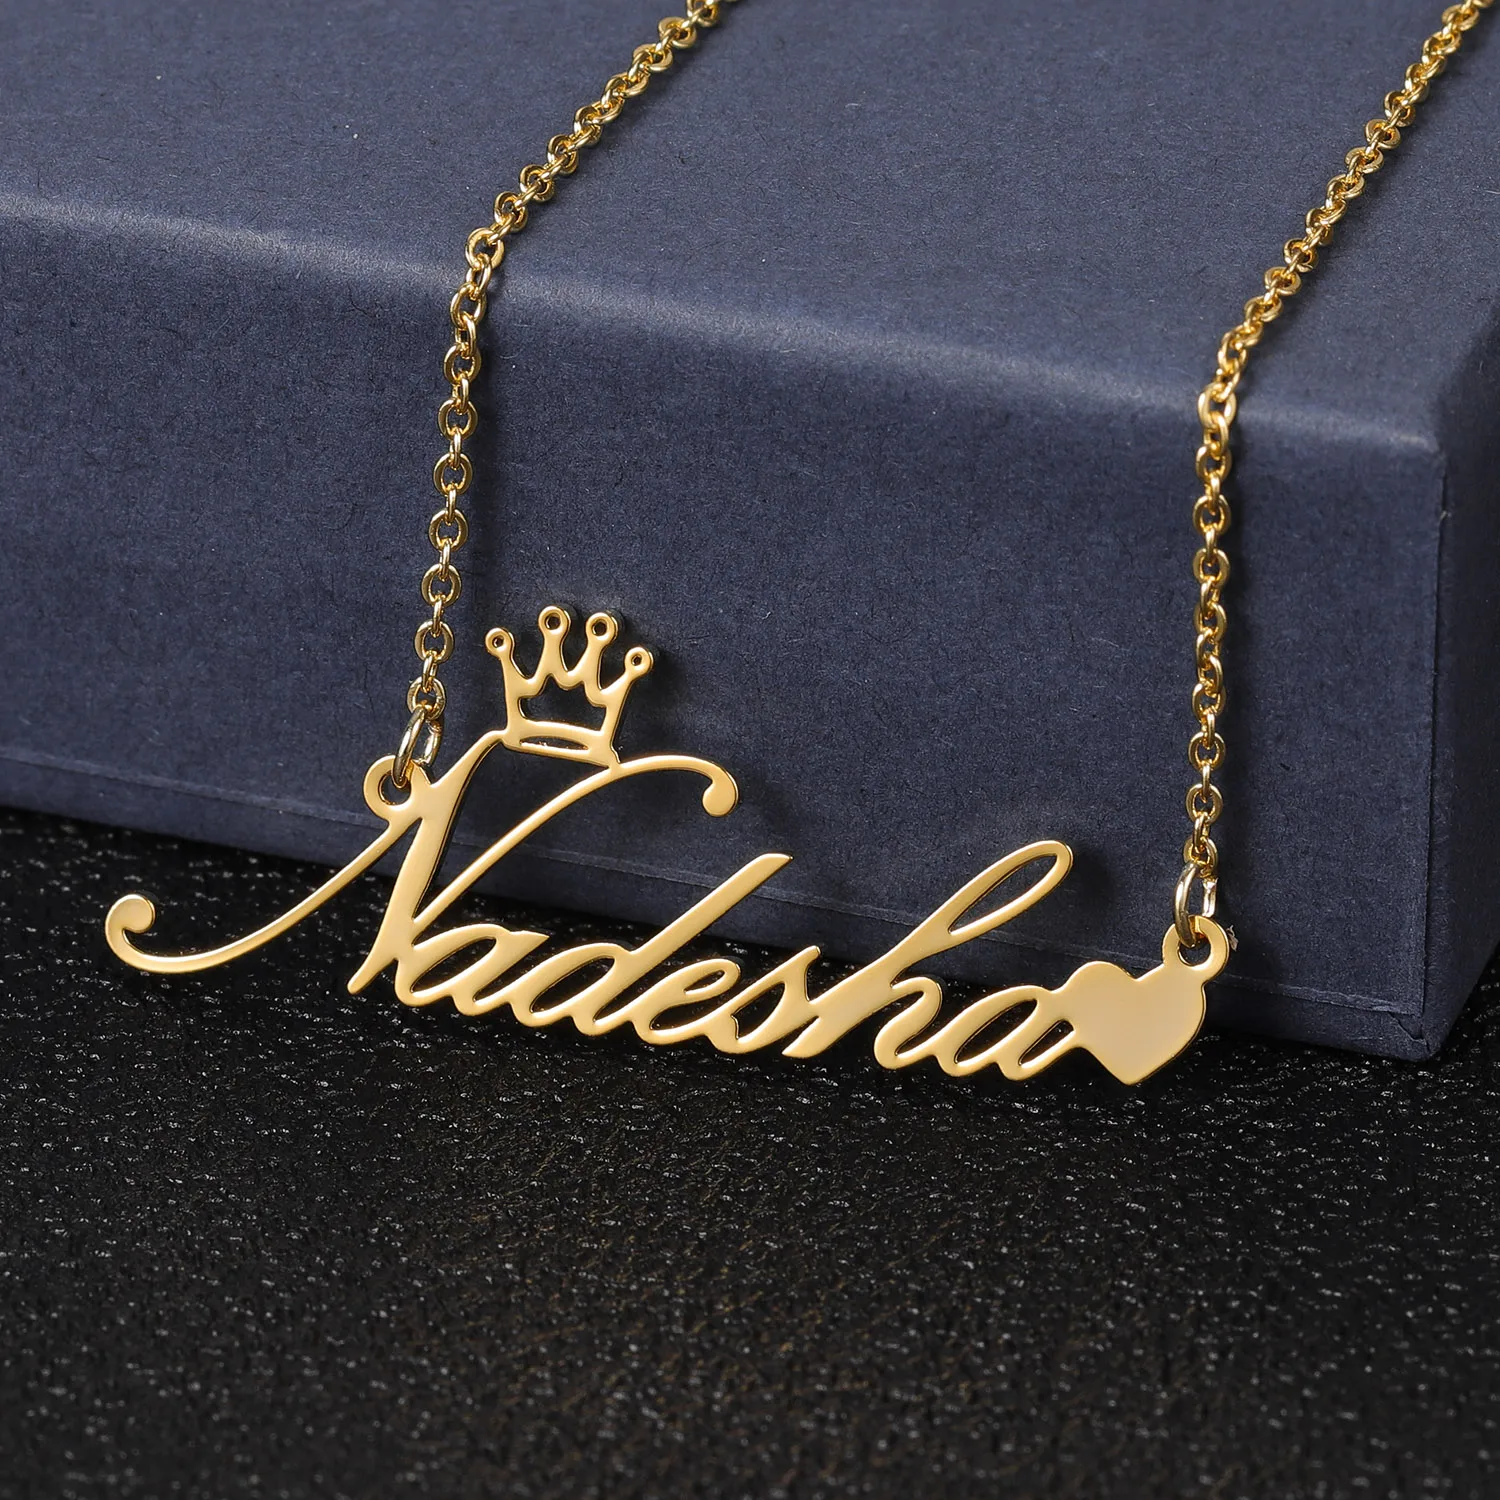 Customized Name Necklace Personality Letter 14K Gilded Stainless Steel Crown Heart Nameplate Pendant Fashion Jewelry For Womens rose flower heart cremation jewelry urn necklace for ashes stainless steel heart memorial keepsake pendant for womens girls